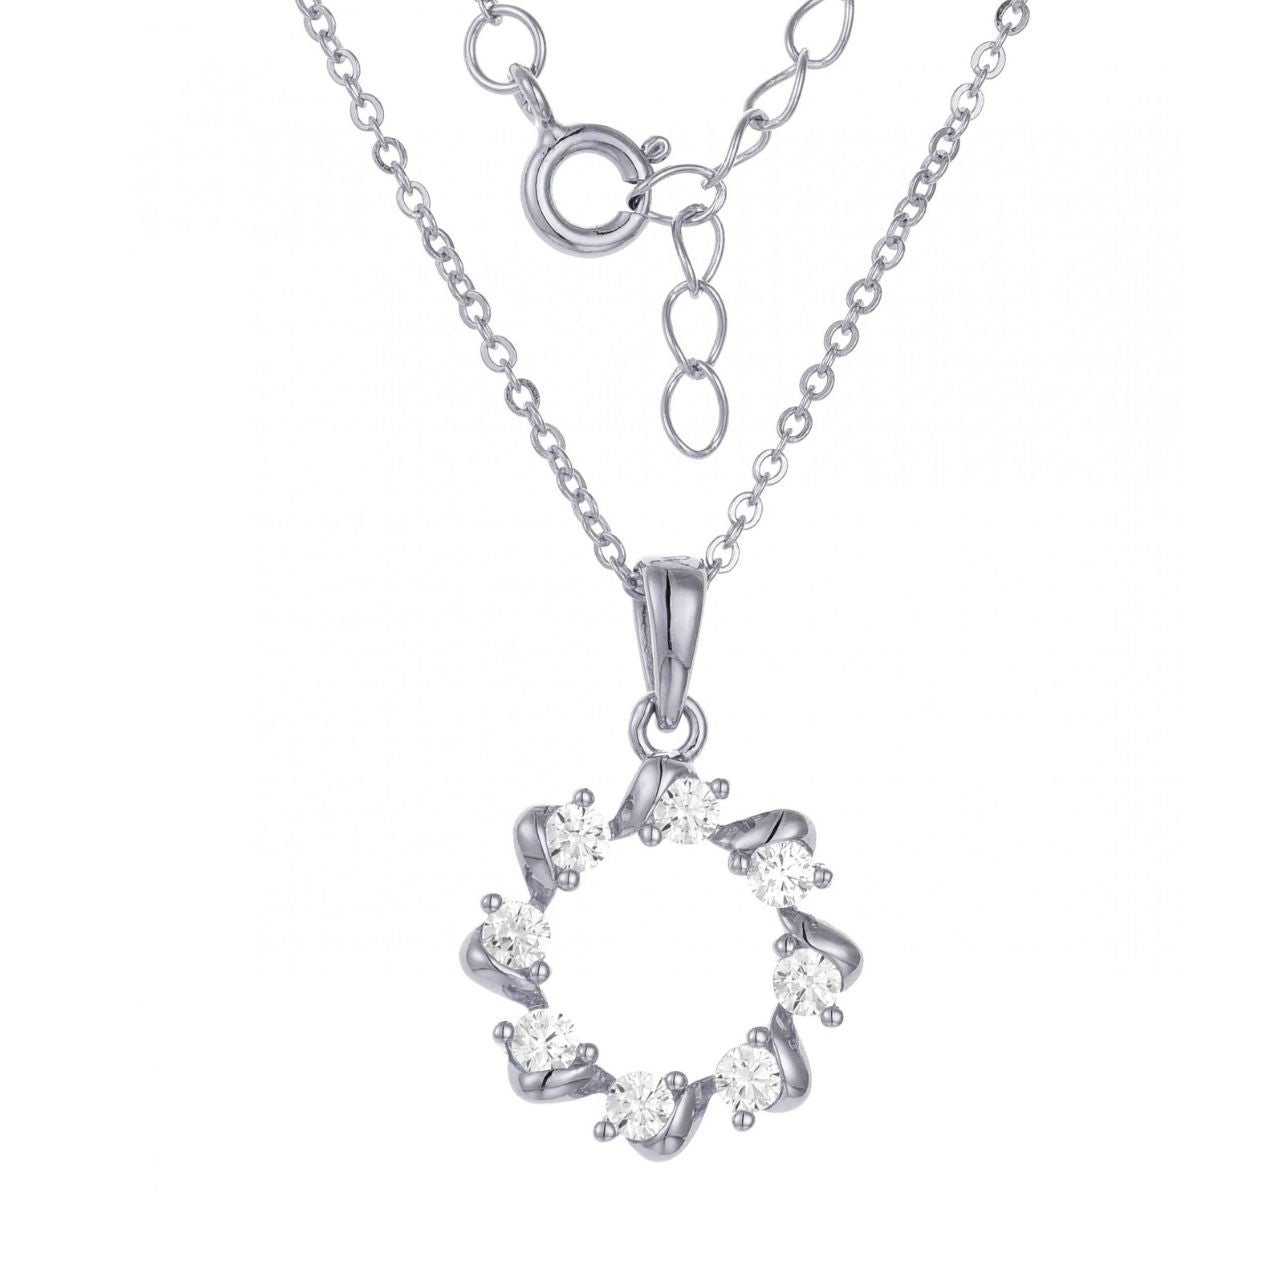 Sterling Silver Circle Necklace by Kilkenny Silver  Sterling silver necklace with clear coloured cubic zirconia stones.